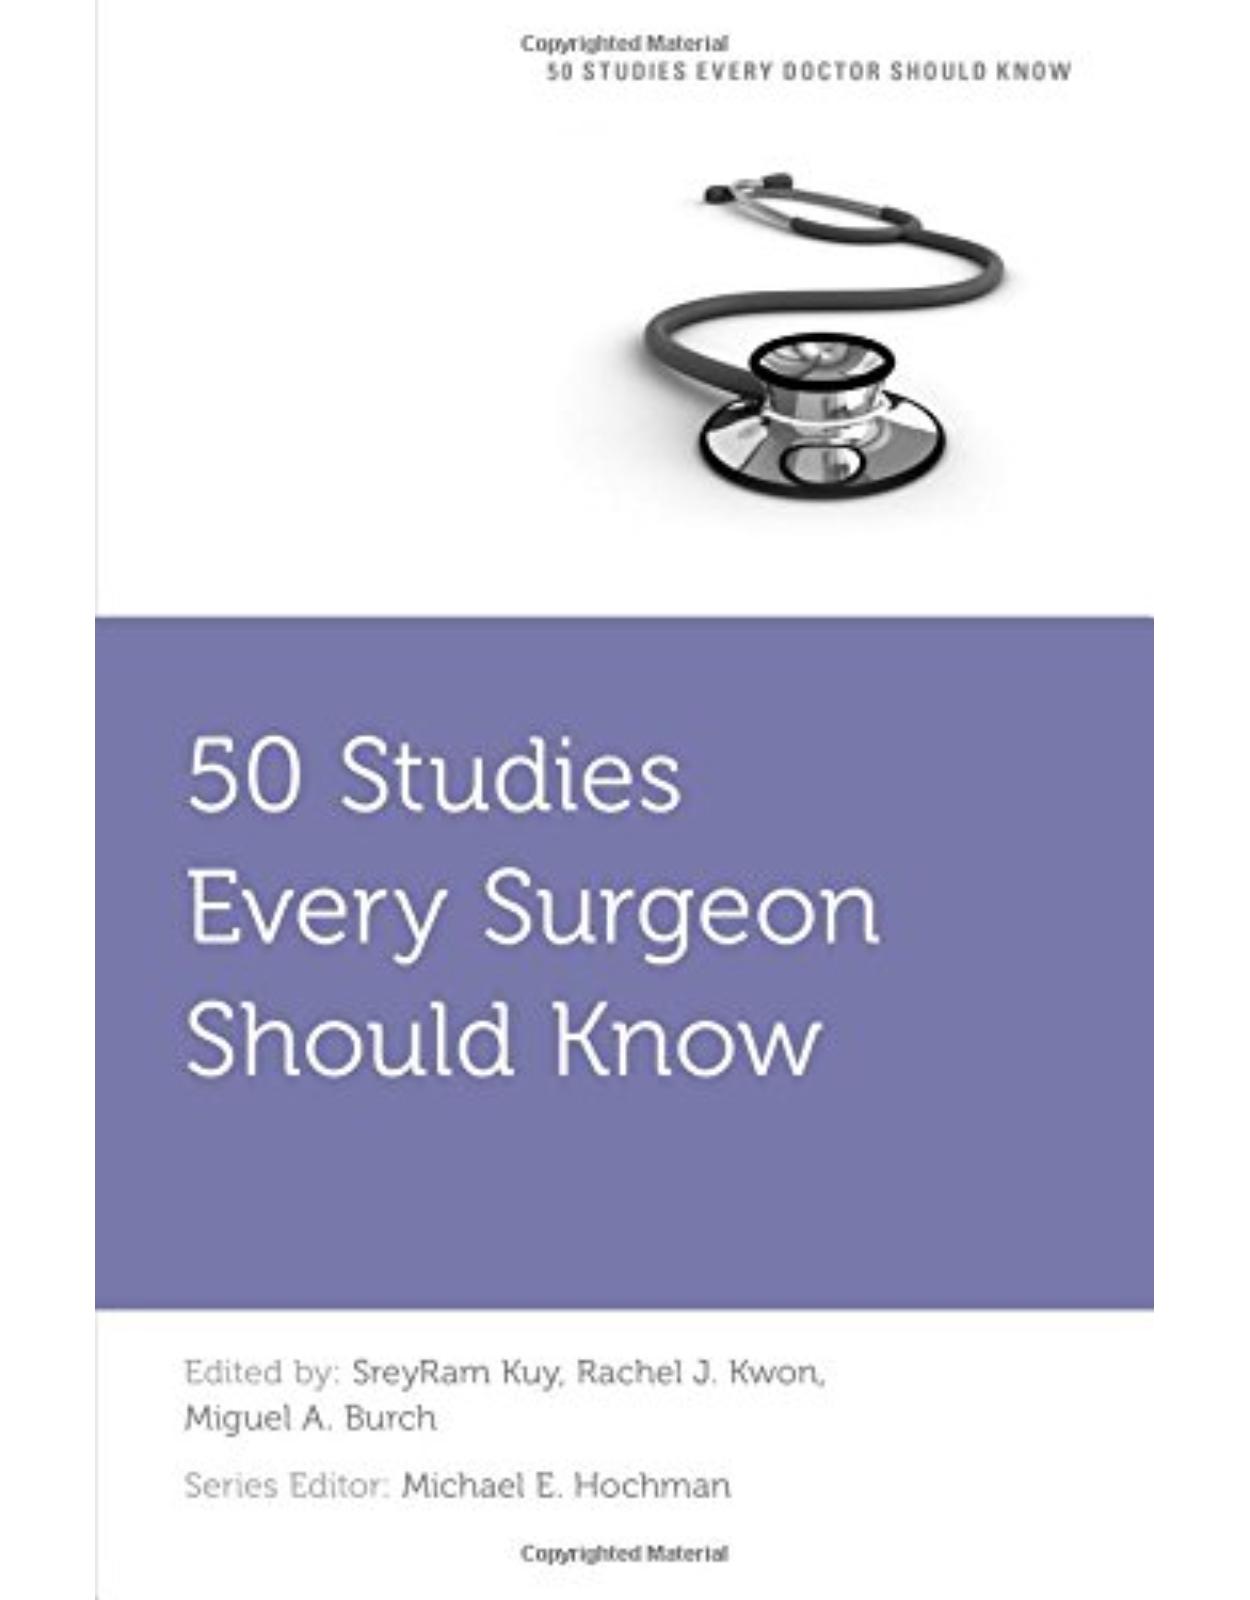 50 Studies Every Surgeon Should Know (Fifty Studies Every Doctor Should Know)